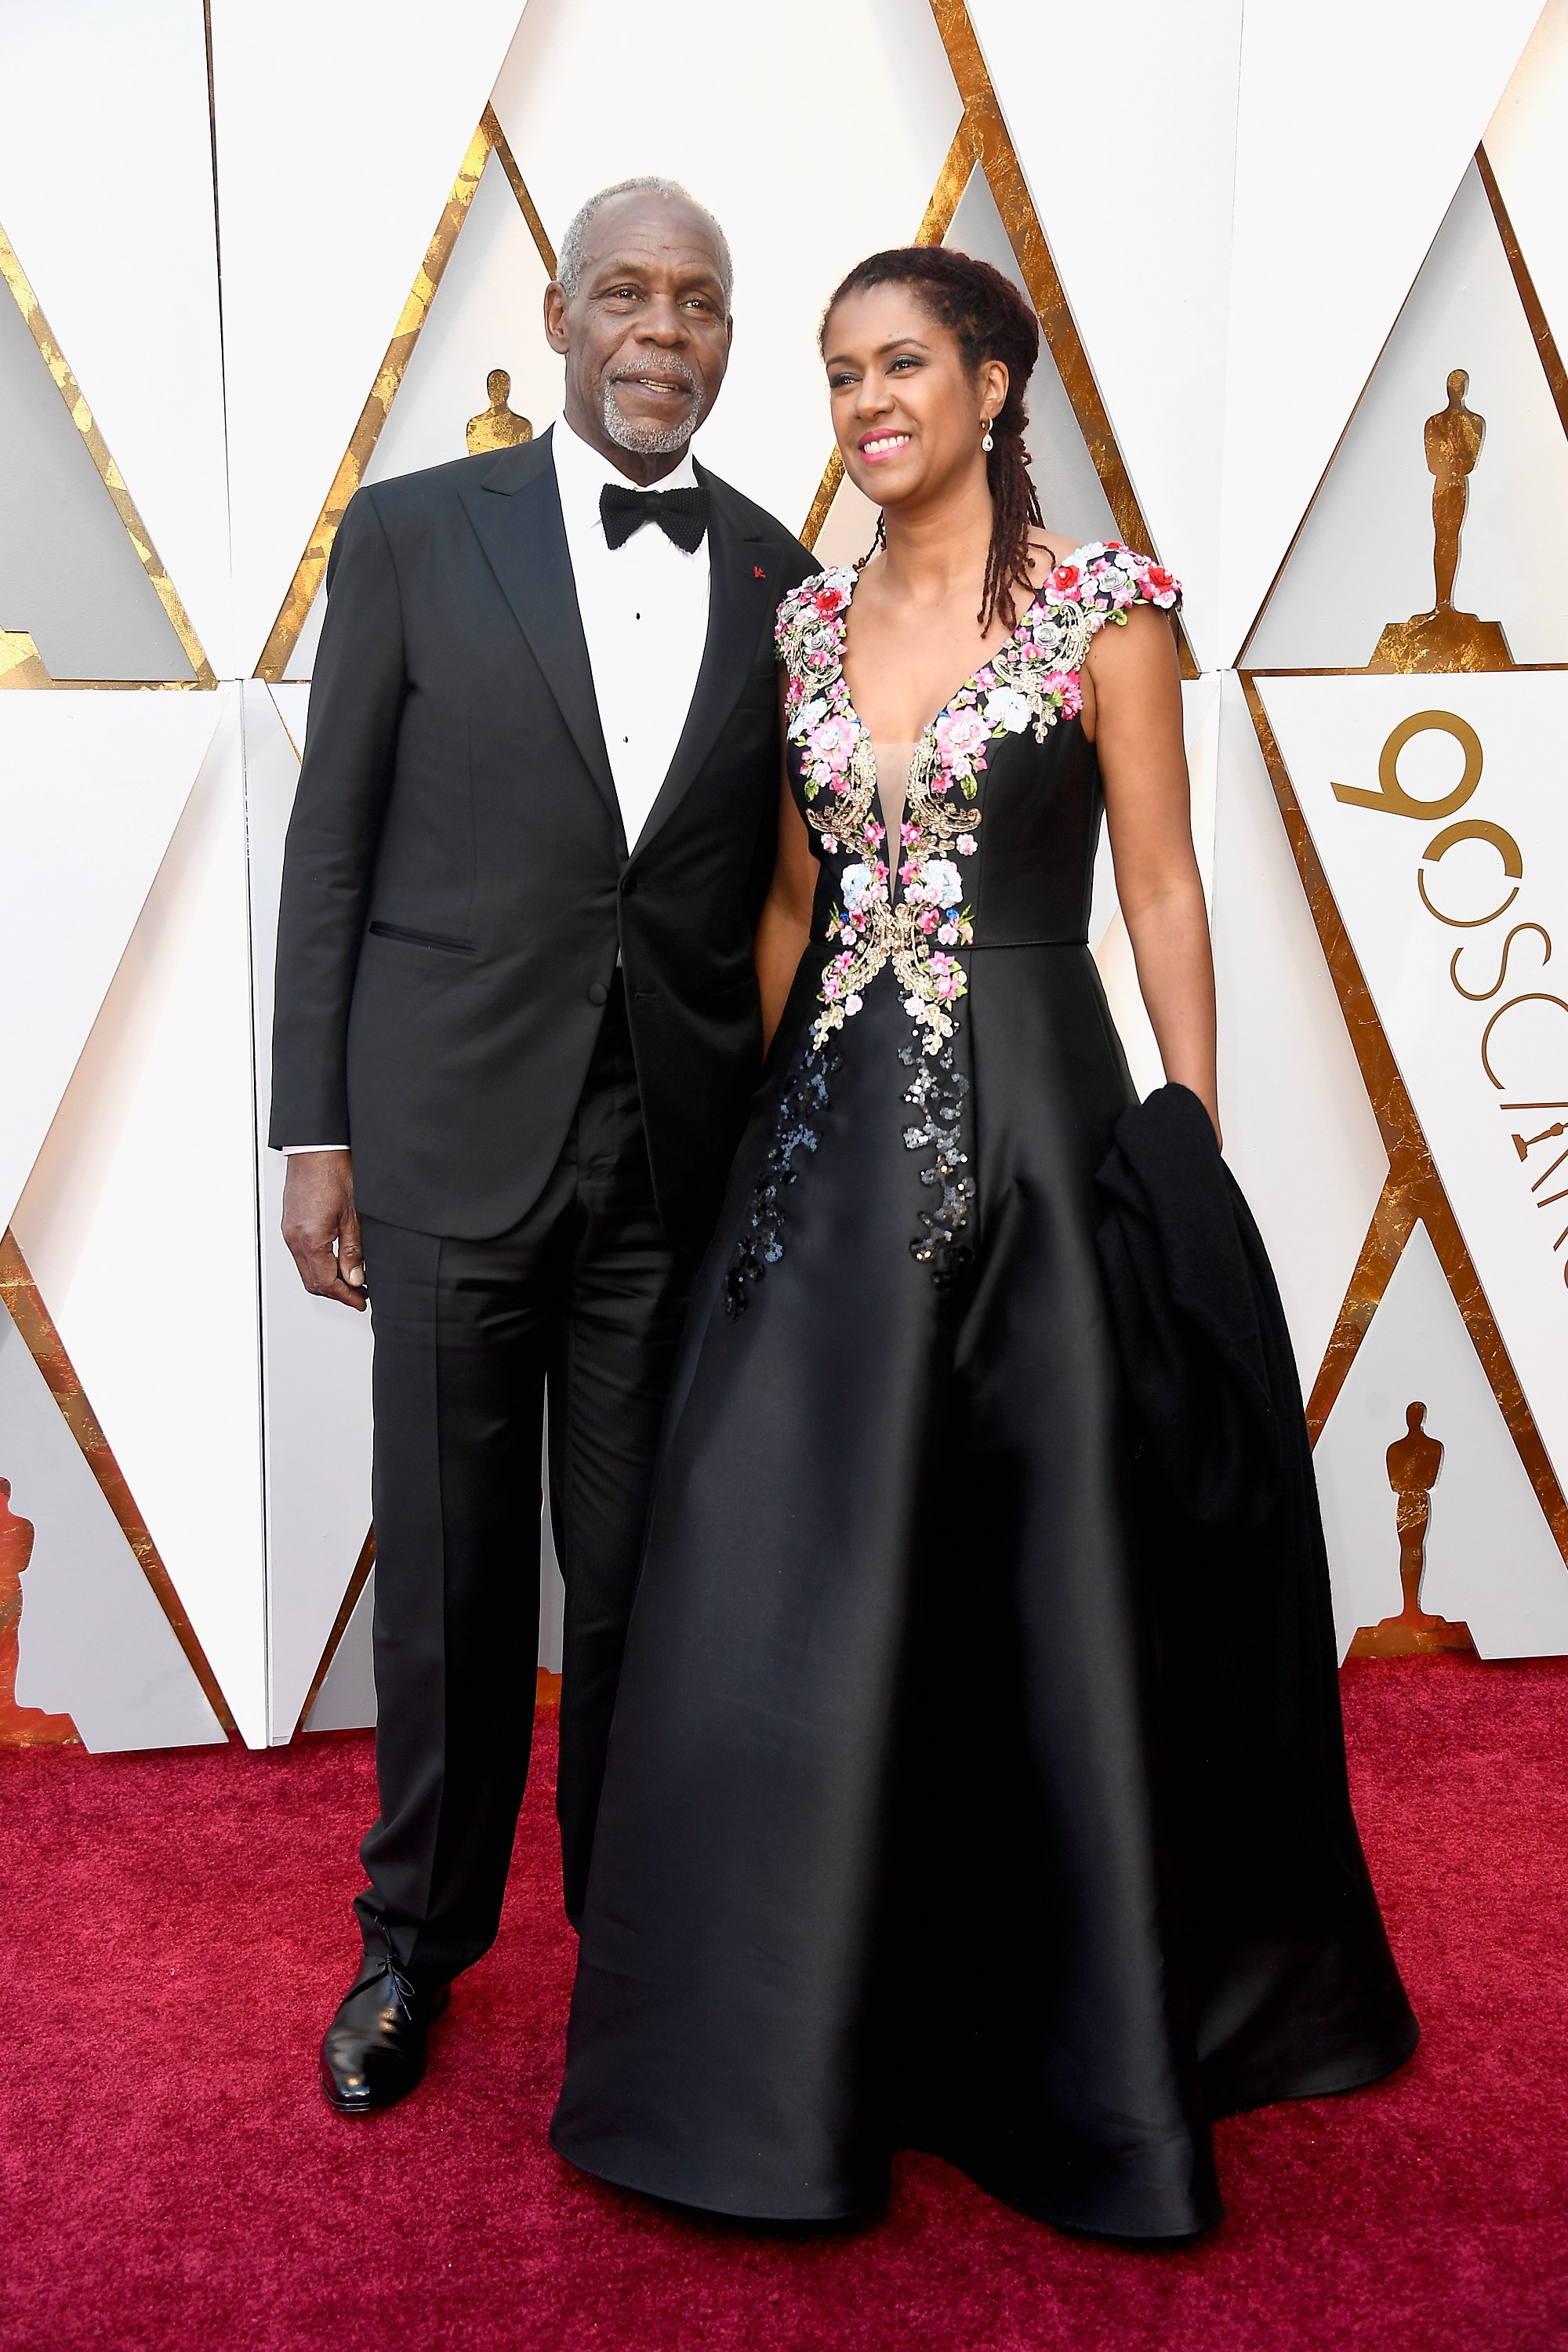 Danny Glover and Eliane Cavalleiro at the 90th Annual Academy Awards on March 4, 2018, in Hollywood, California. | Source: Frazer Harrison/Getty Images